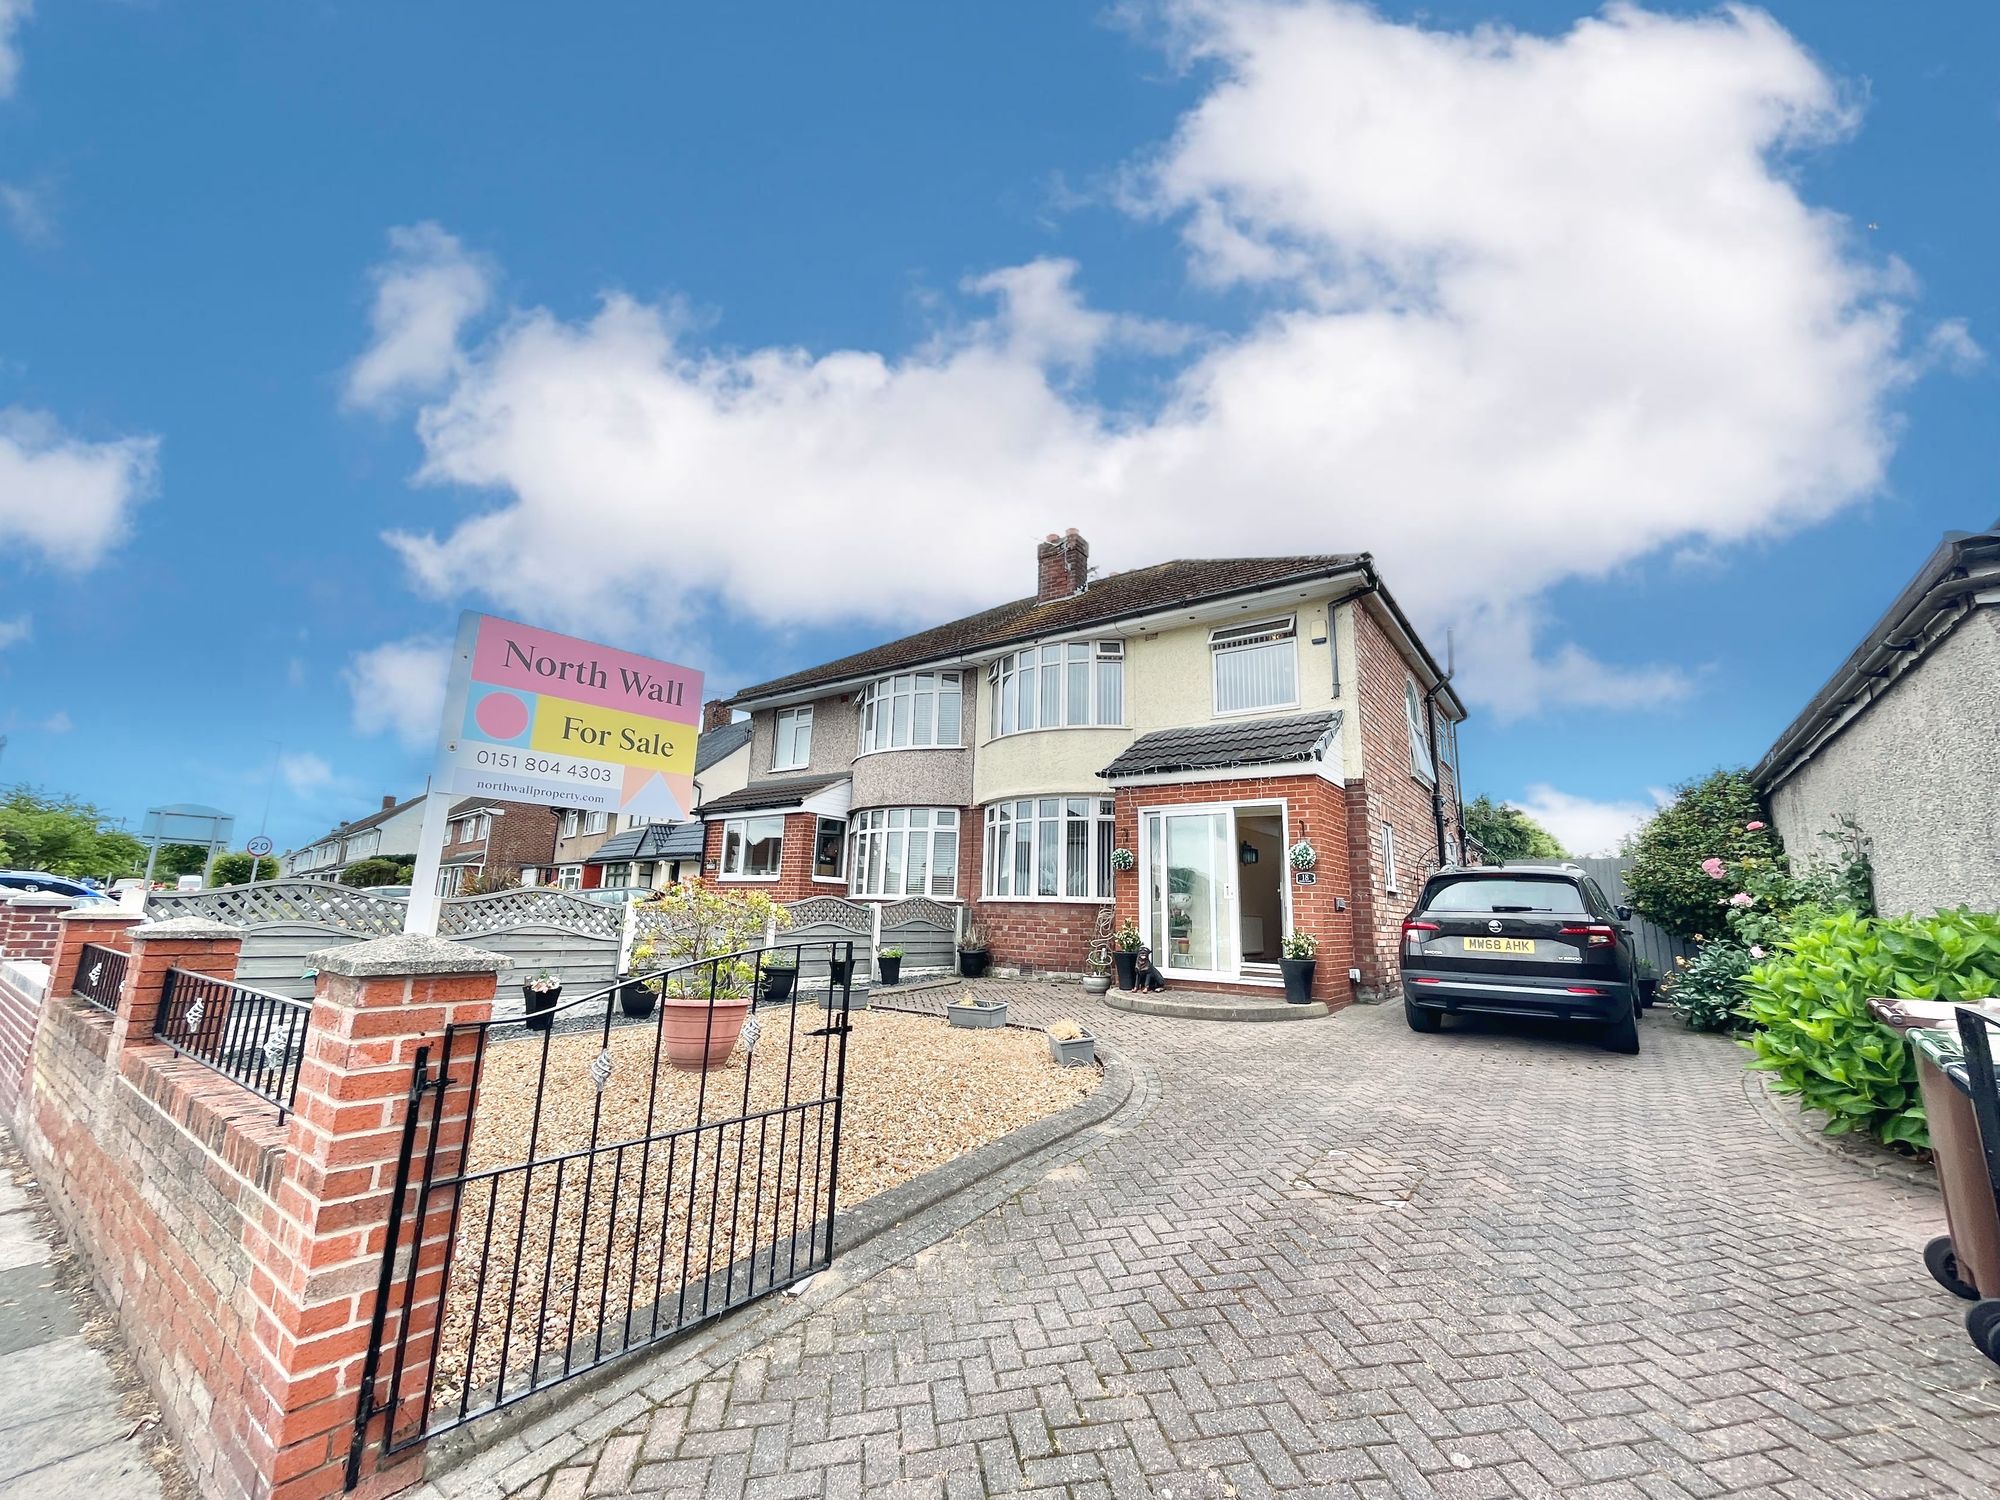 3 bed semi-detached house for sale in Edge Lane, Liverpool, L23 